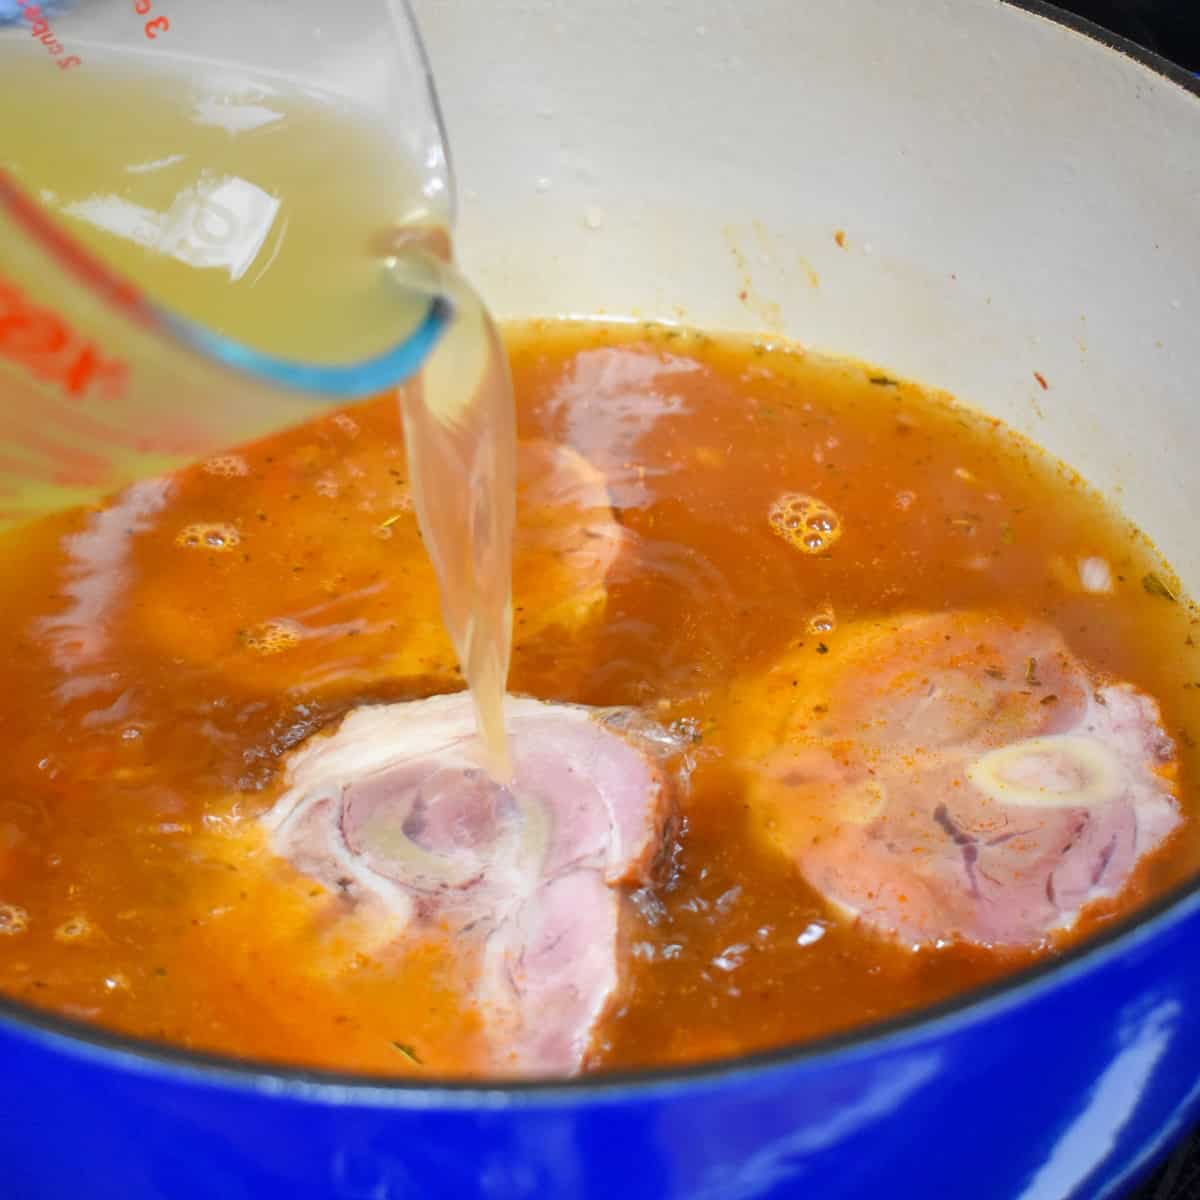 Chicken broth being poured in to the pot.